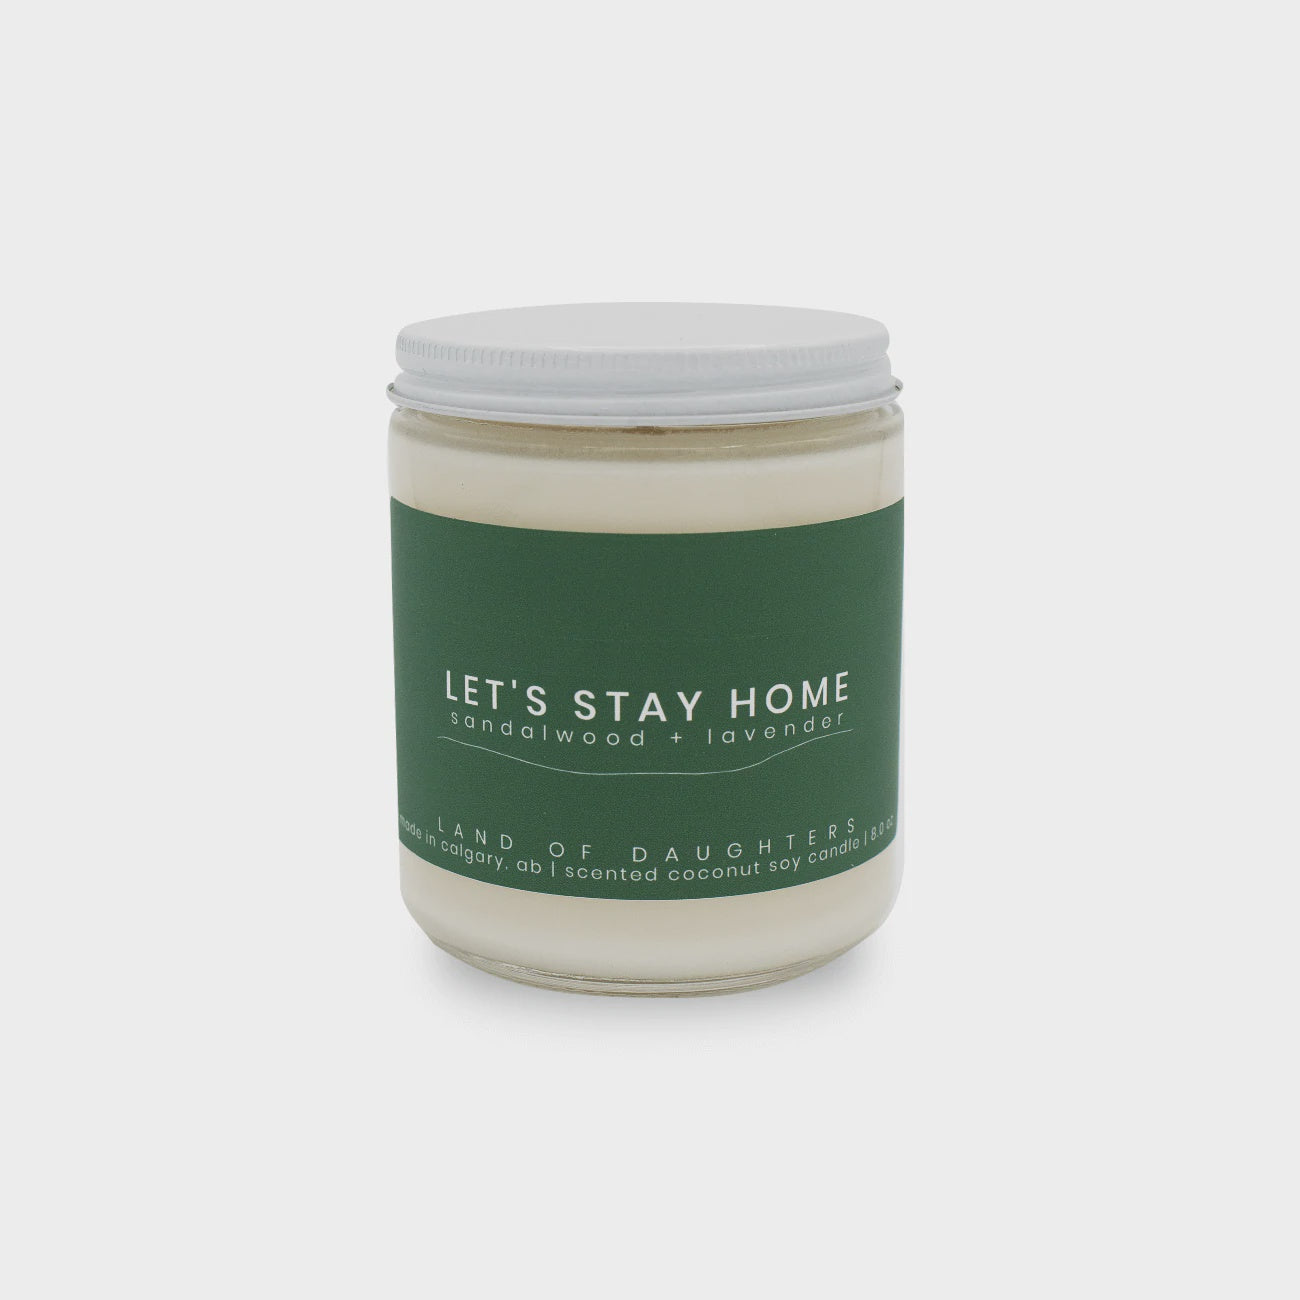 LAND OF DAUGHTERS - LET'S STAY HOME CANDLE - 8OZ